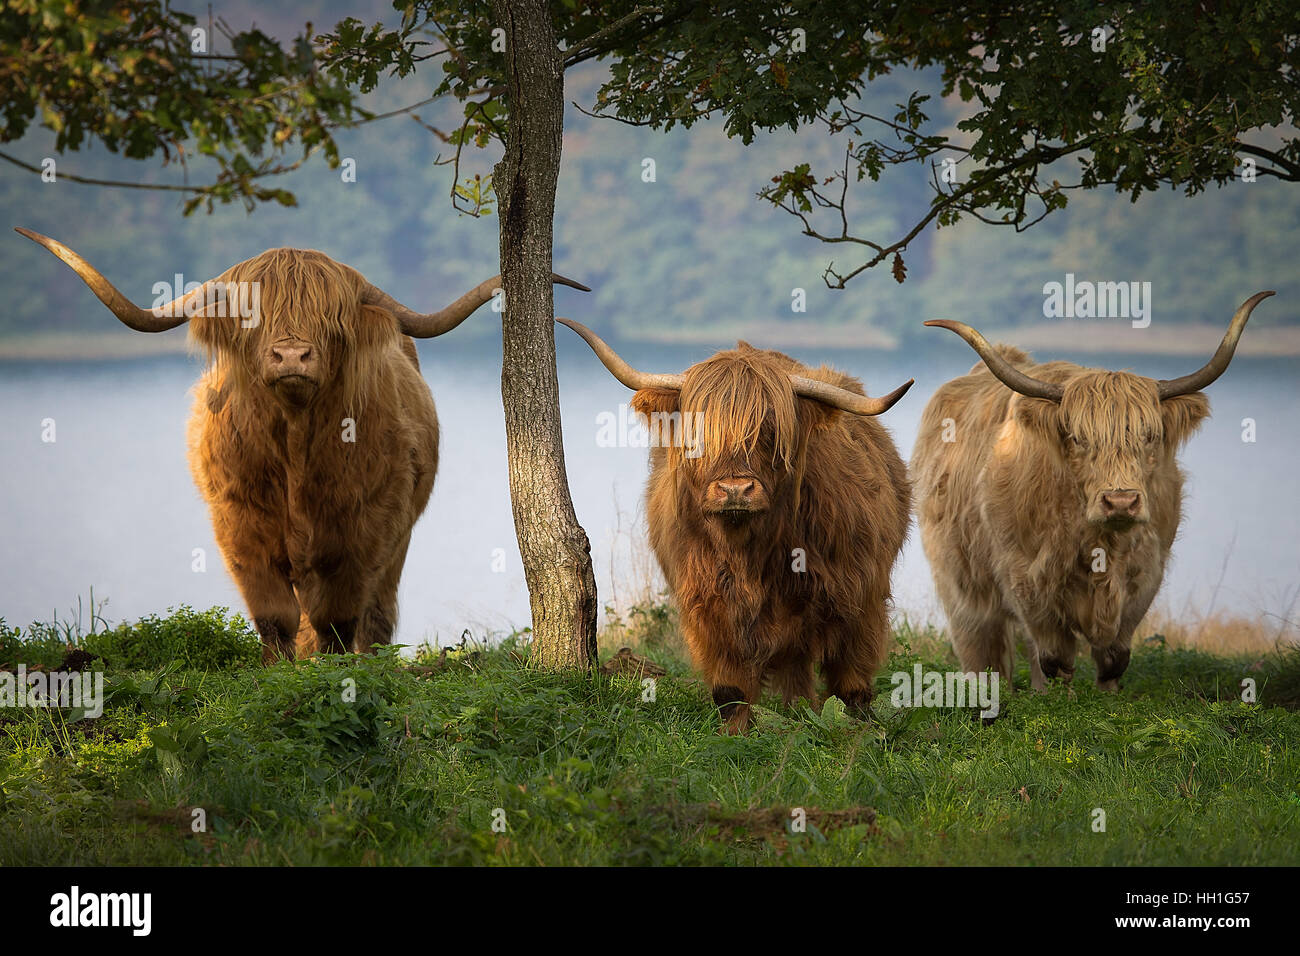 Highland cattle in the hills Stock Photo